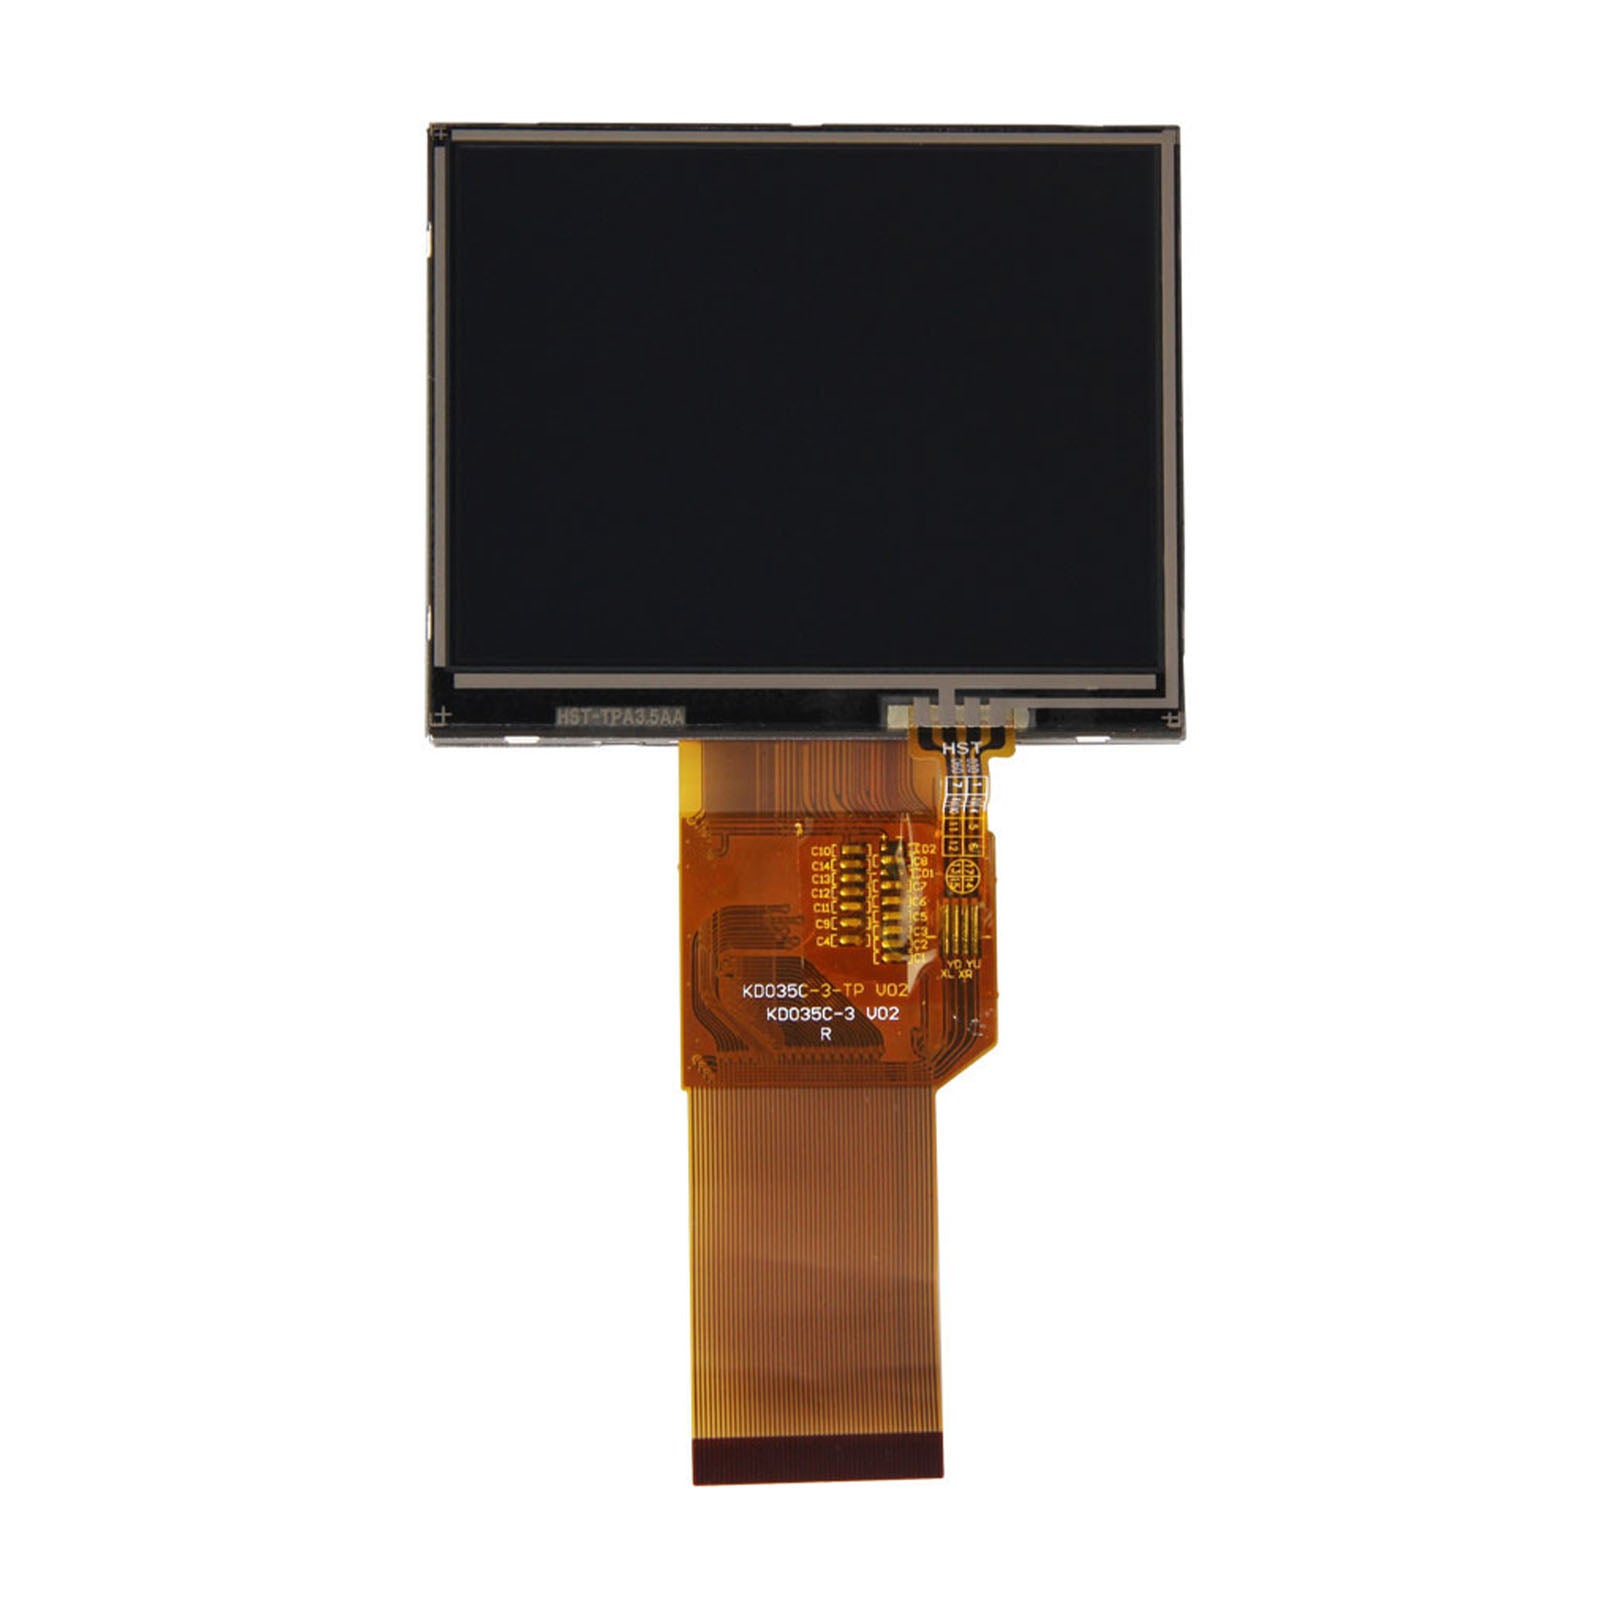 3.5-inch TFT display panel with 320x240 resolution, resistive touch capability, and SPI, MCU, RGB interfaces